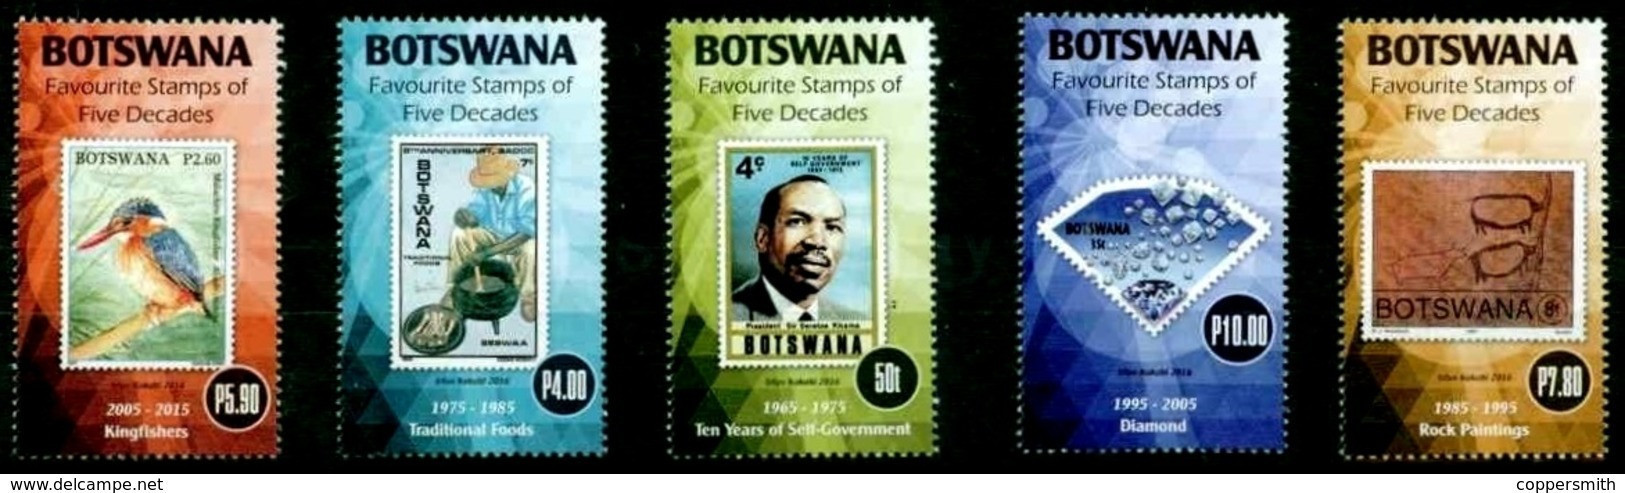 (280) Botswana  2016 / Post Day / Stamp On Stamp / Timbre Sur Timbre ** / Mnh  Michel 1043-47 - Botswana (1966-...)